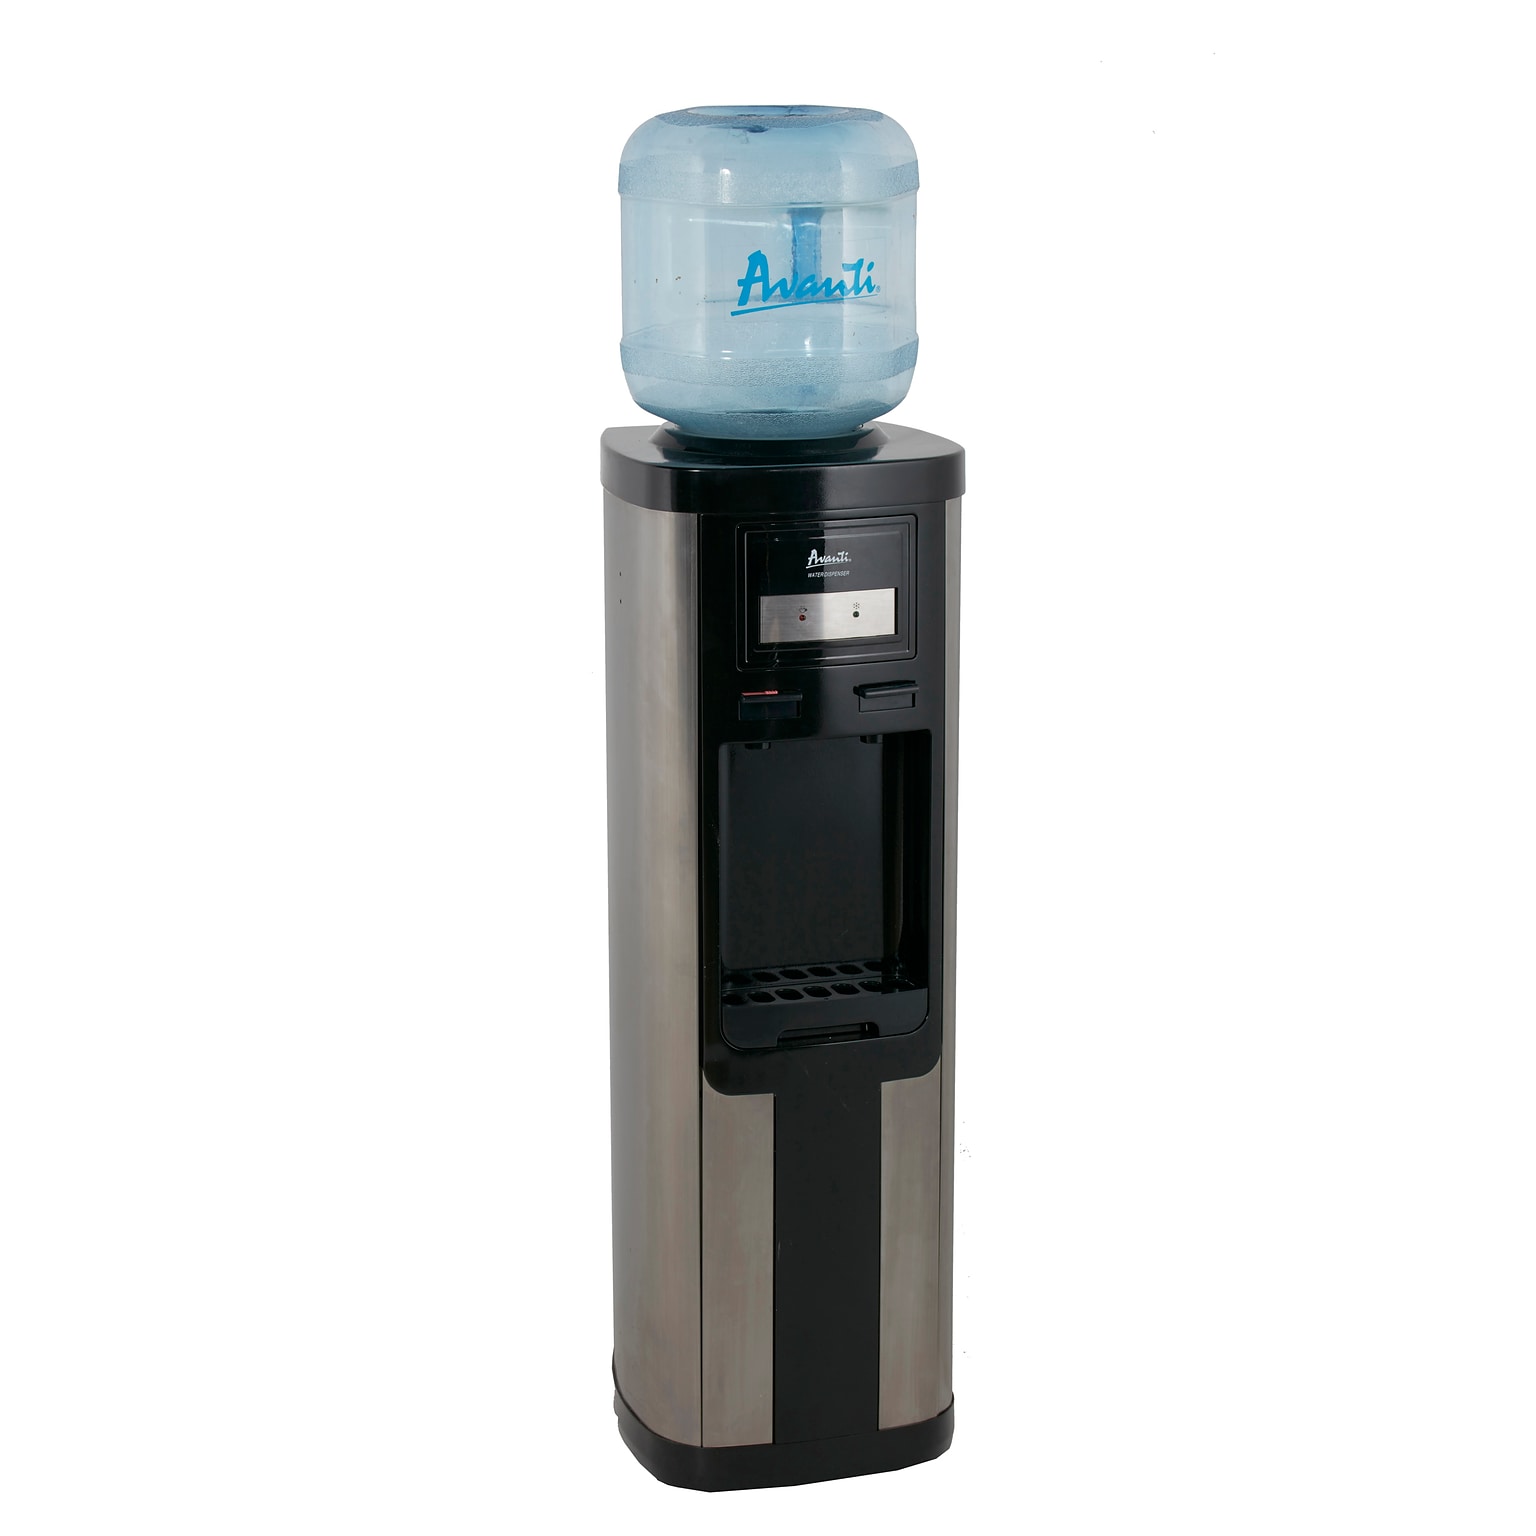 Avanti 3, 4, or 5 Gal. Hot and Cold Water Dispenser (WDC760I3S)